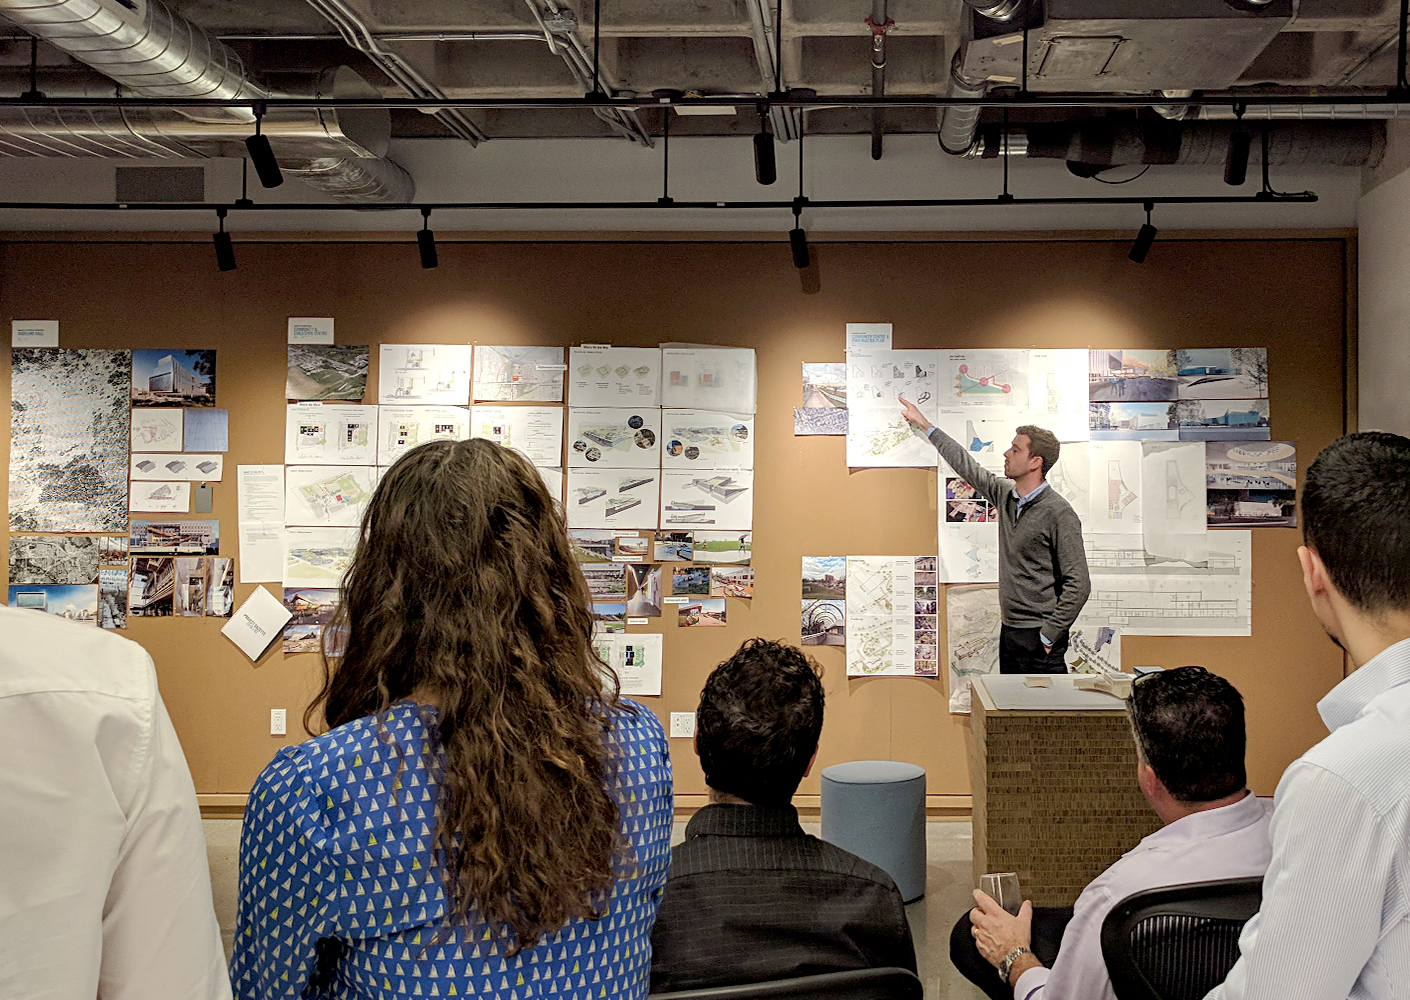 Studio members discuss projects during biweekly Design review Panel presentations